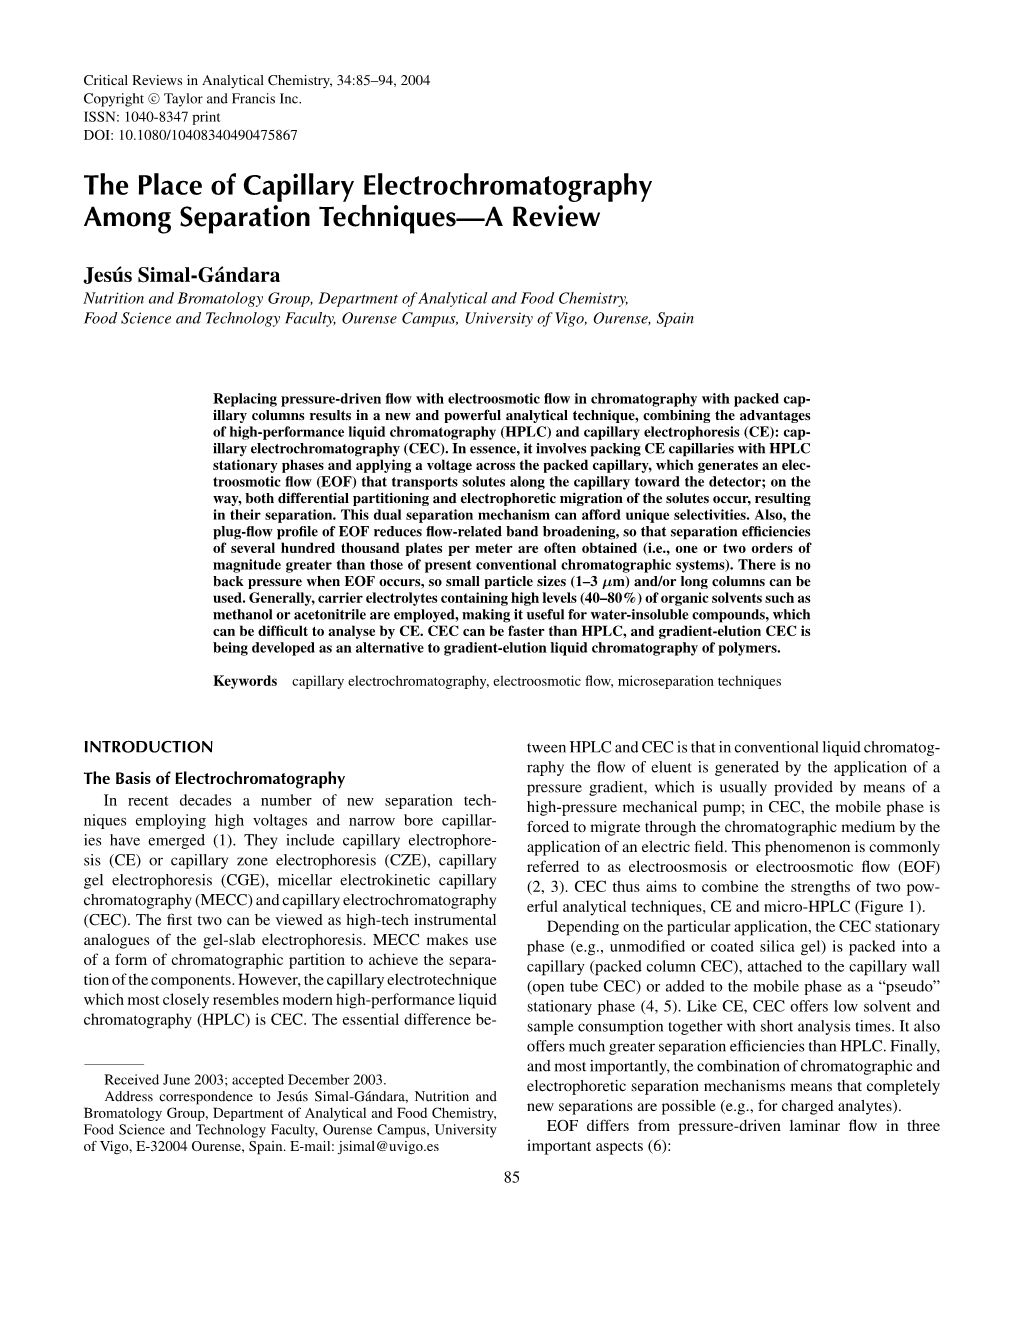 The Place of Capillary Electrochromatography Among Separation Techniques—A Review